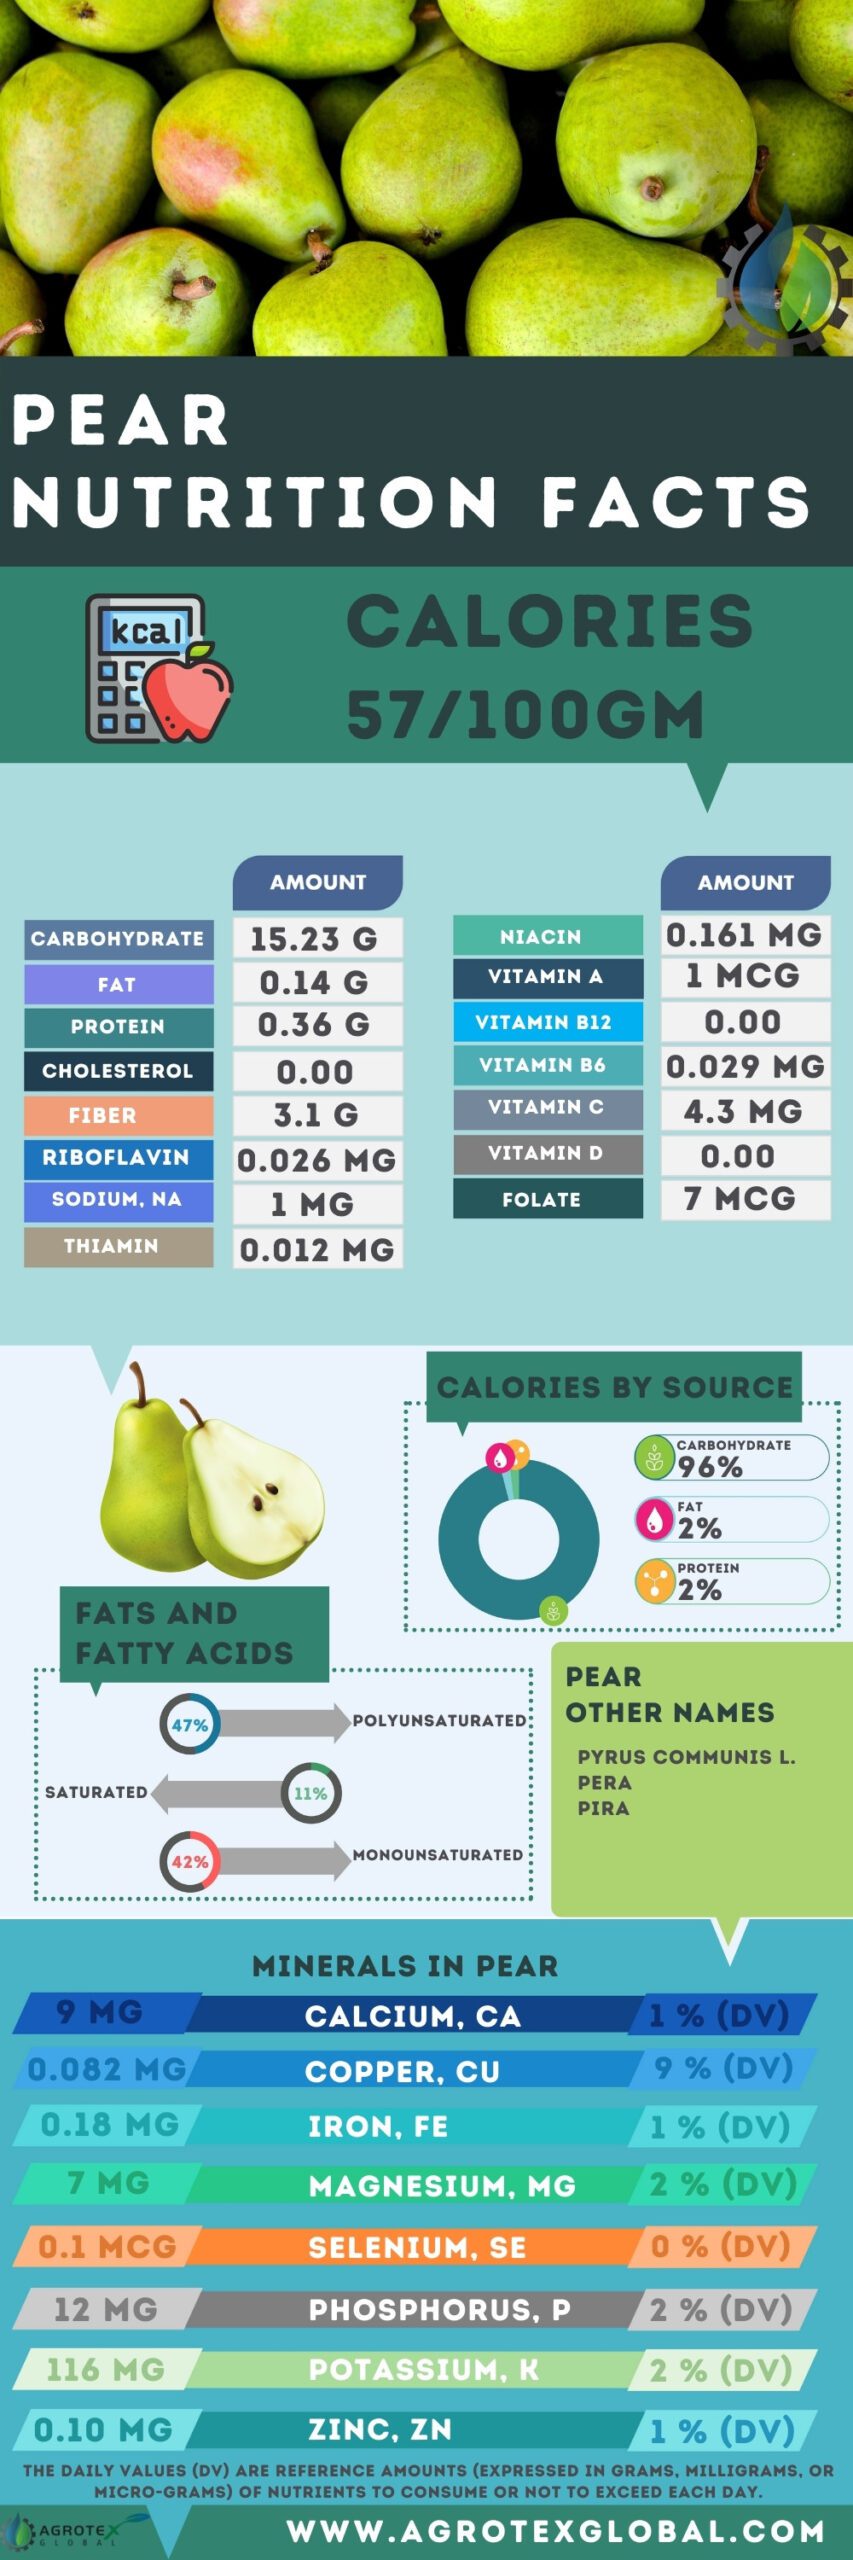 Pear NUTRITION FACTS calorie chart infographic